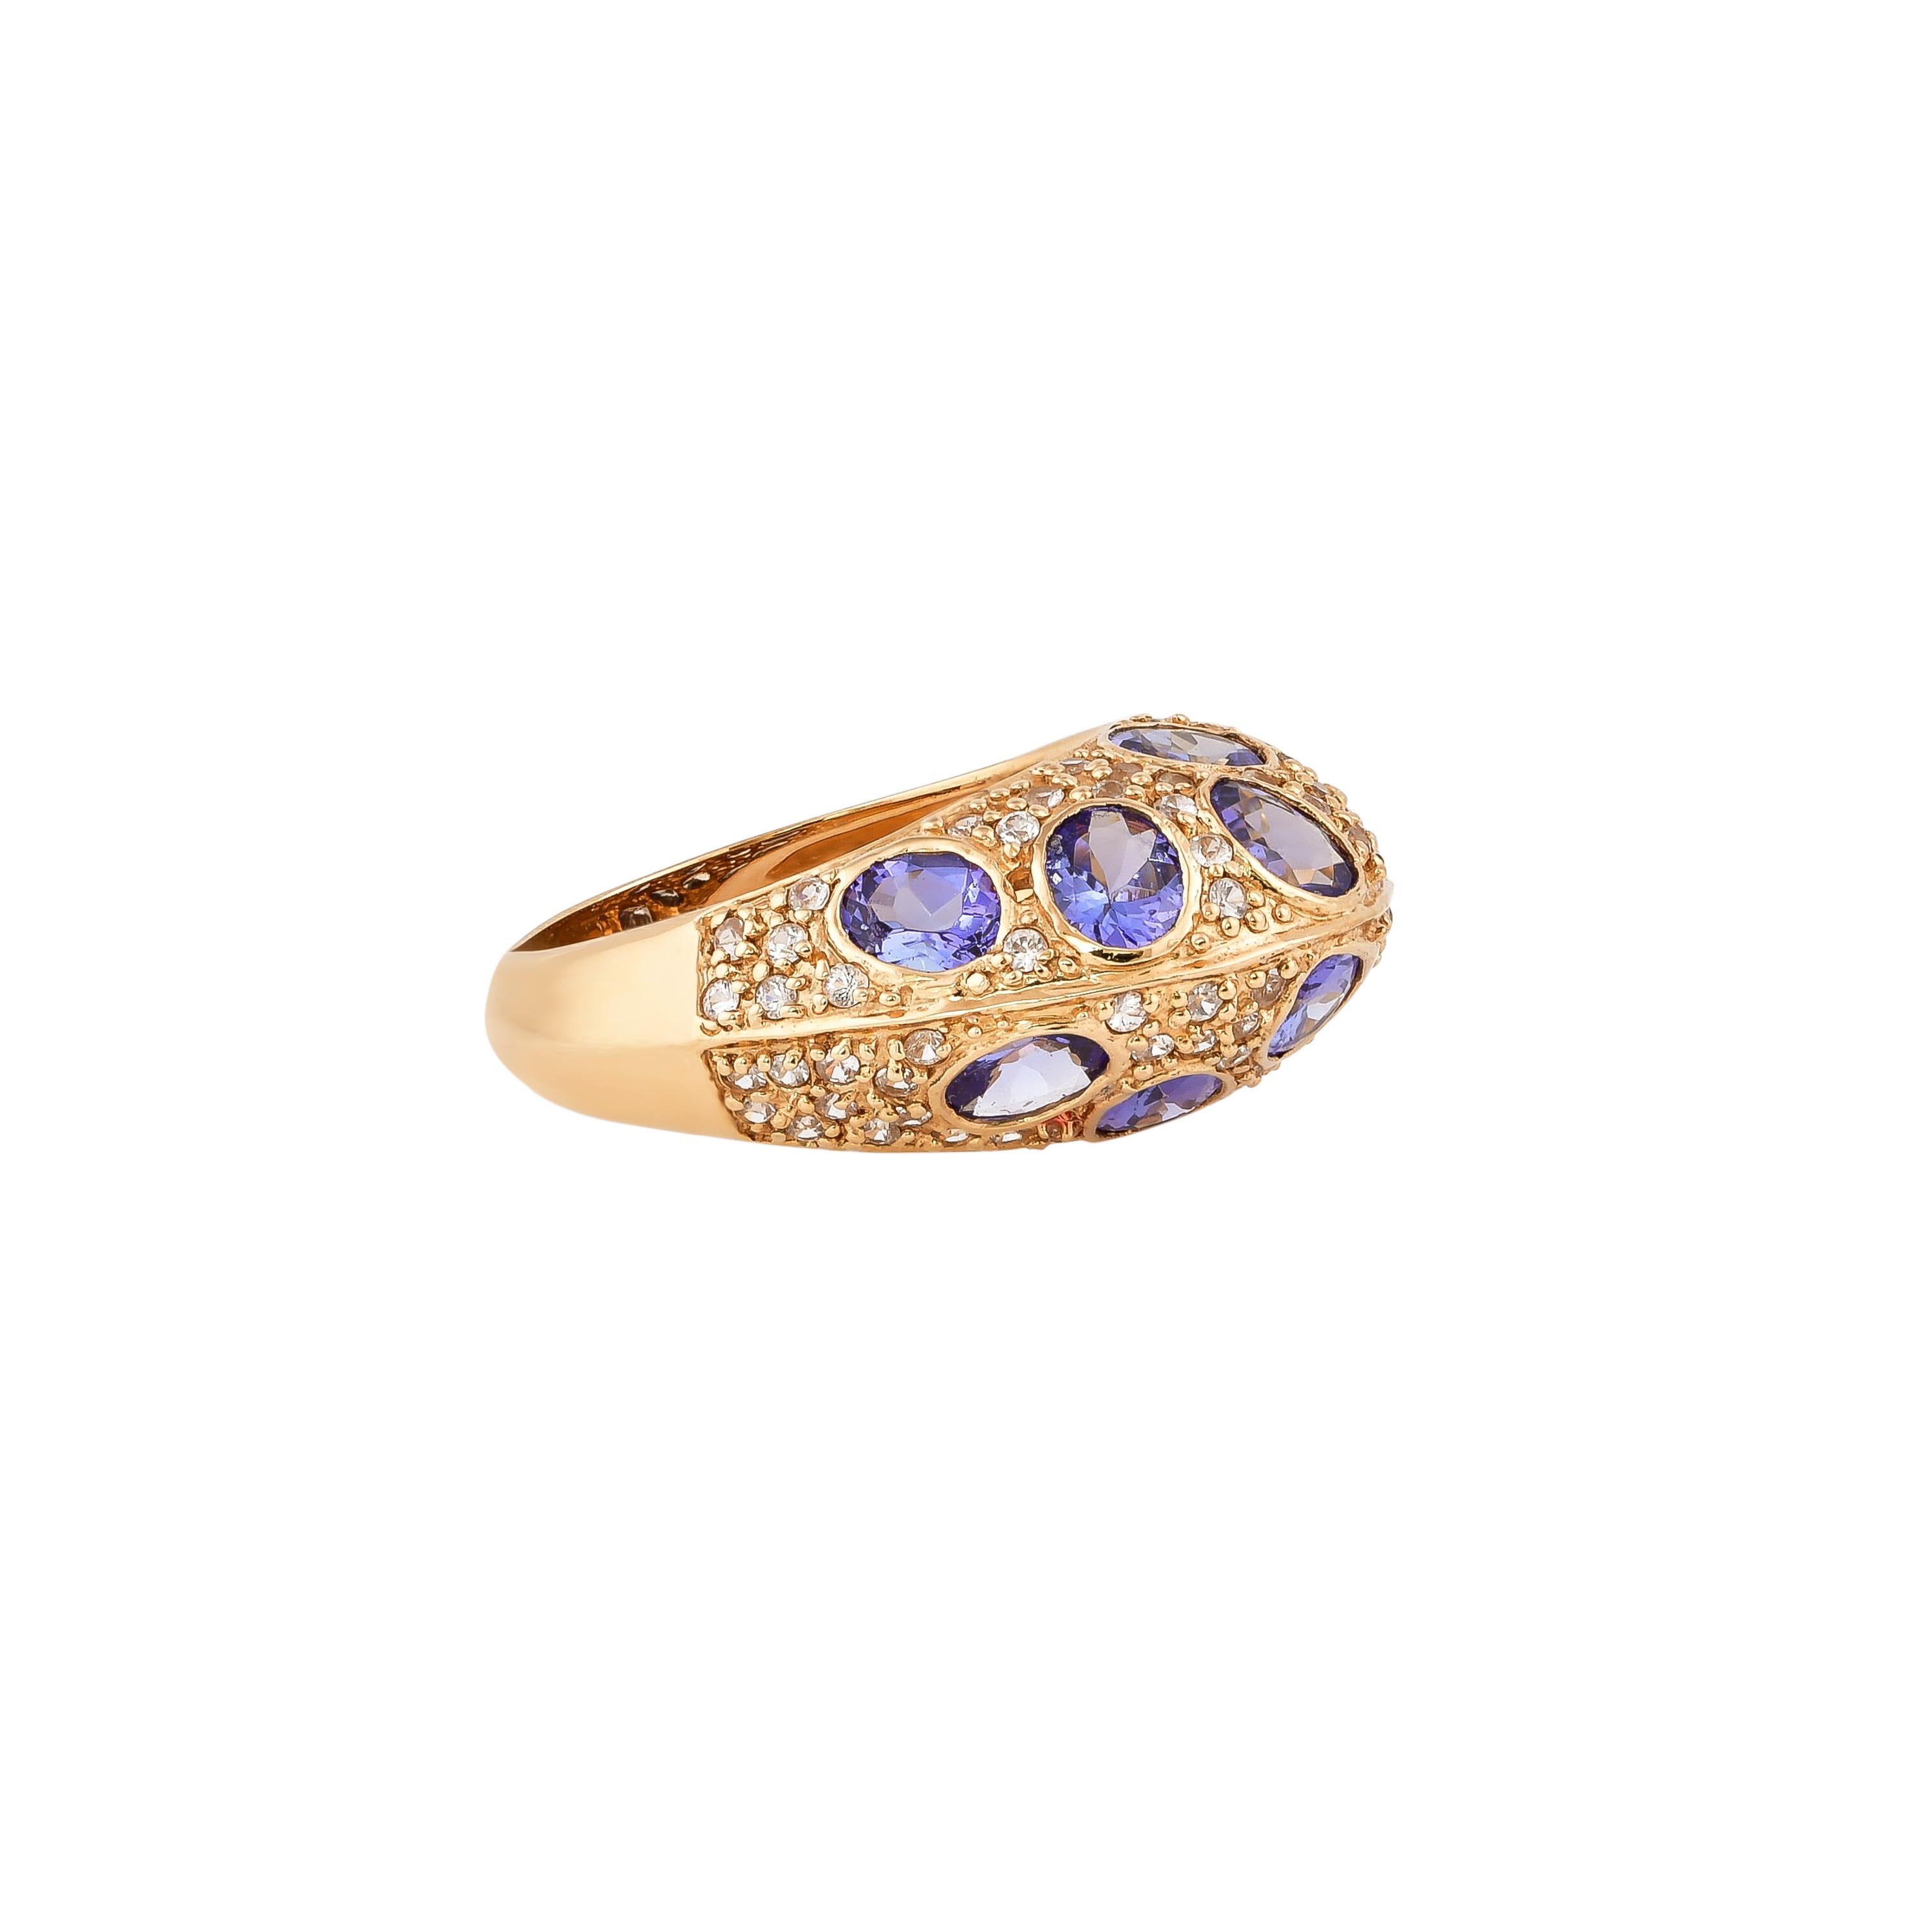 Glamorous Gemstones - Sunita Nahata started off her career as a gemstone trader, and this particular collection reflects her love for multi-colored semi-precious gemstones. This ring presents a cluster of tanzanites accented with pave white